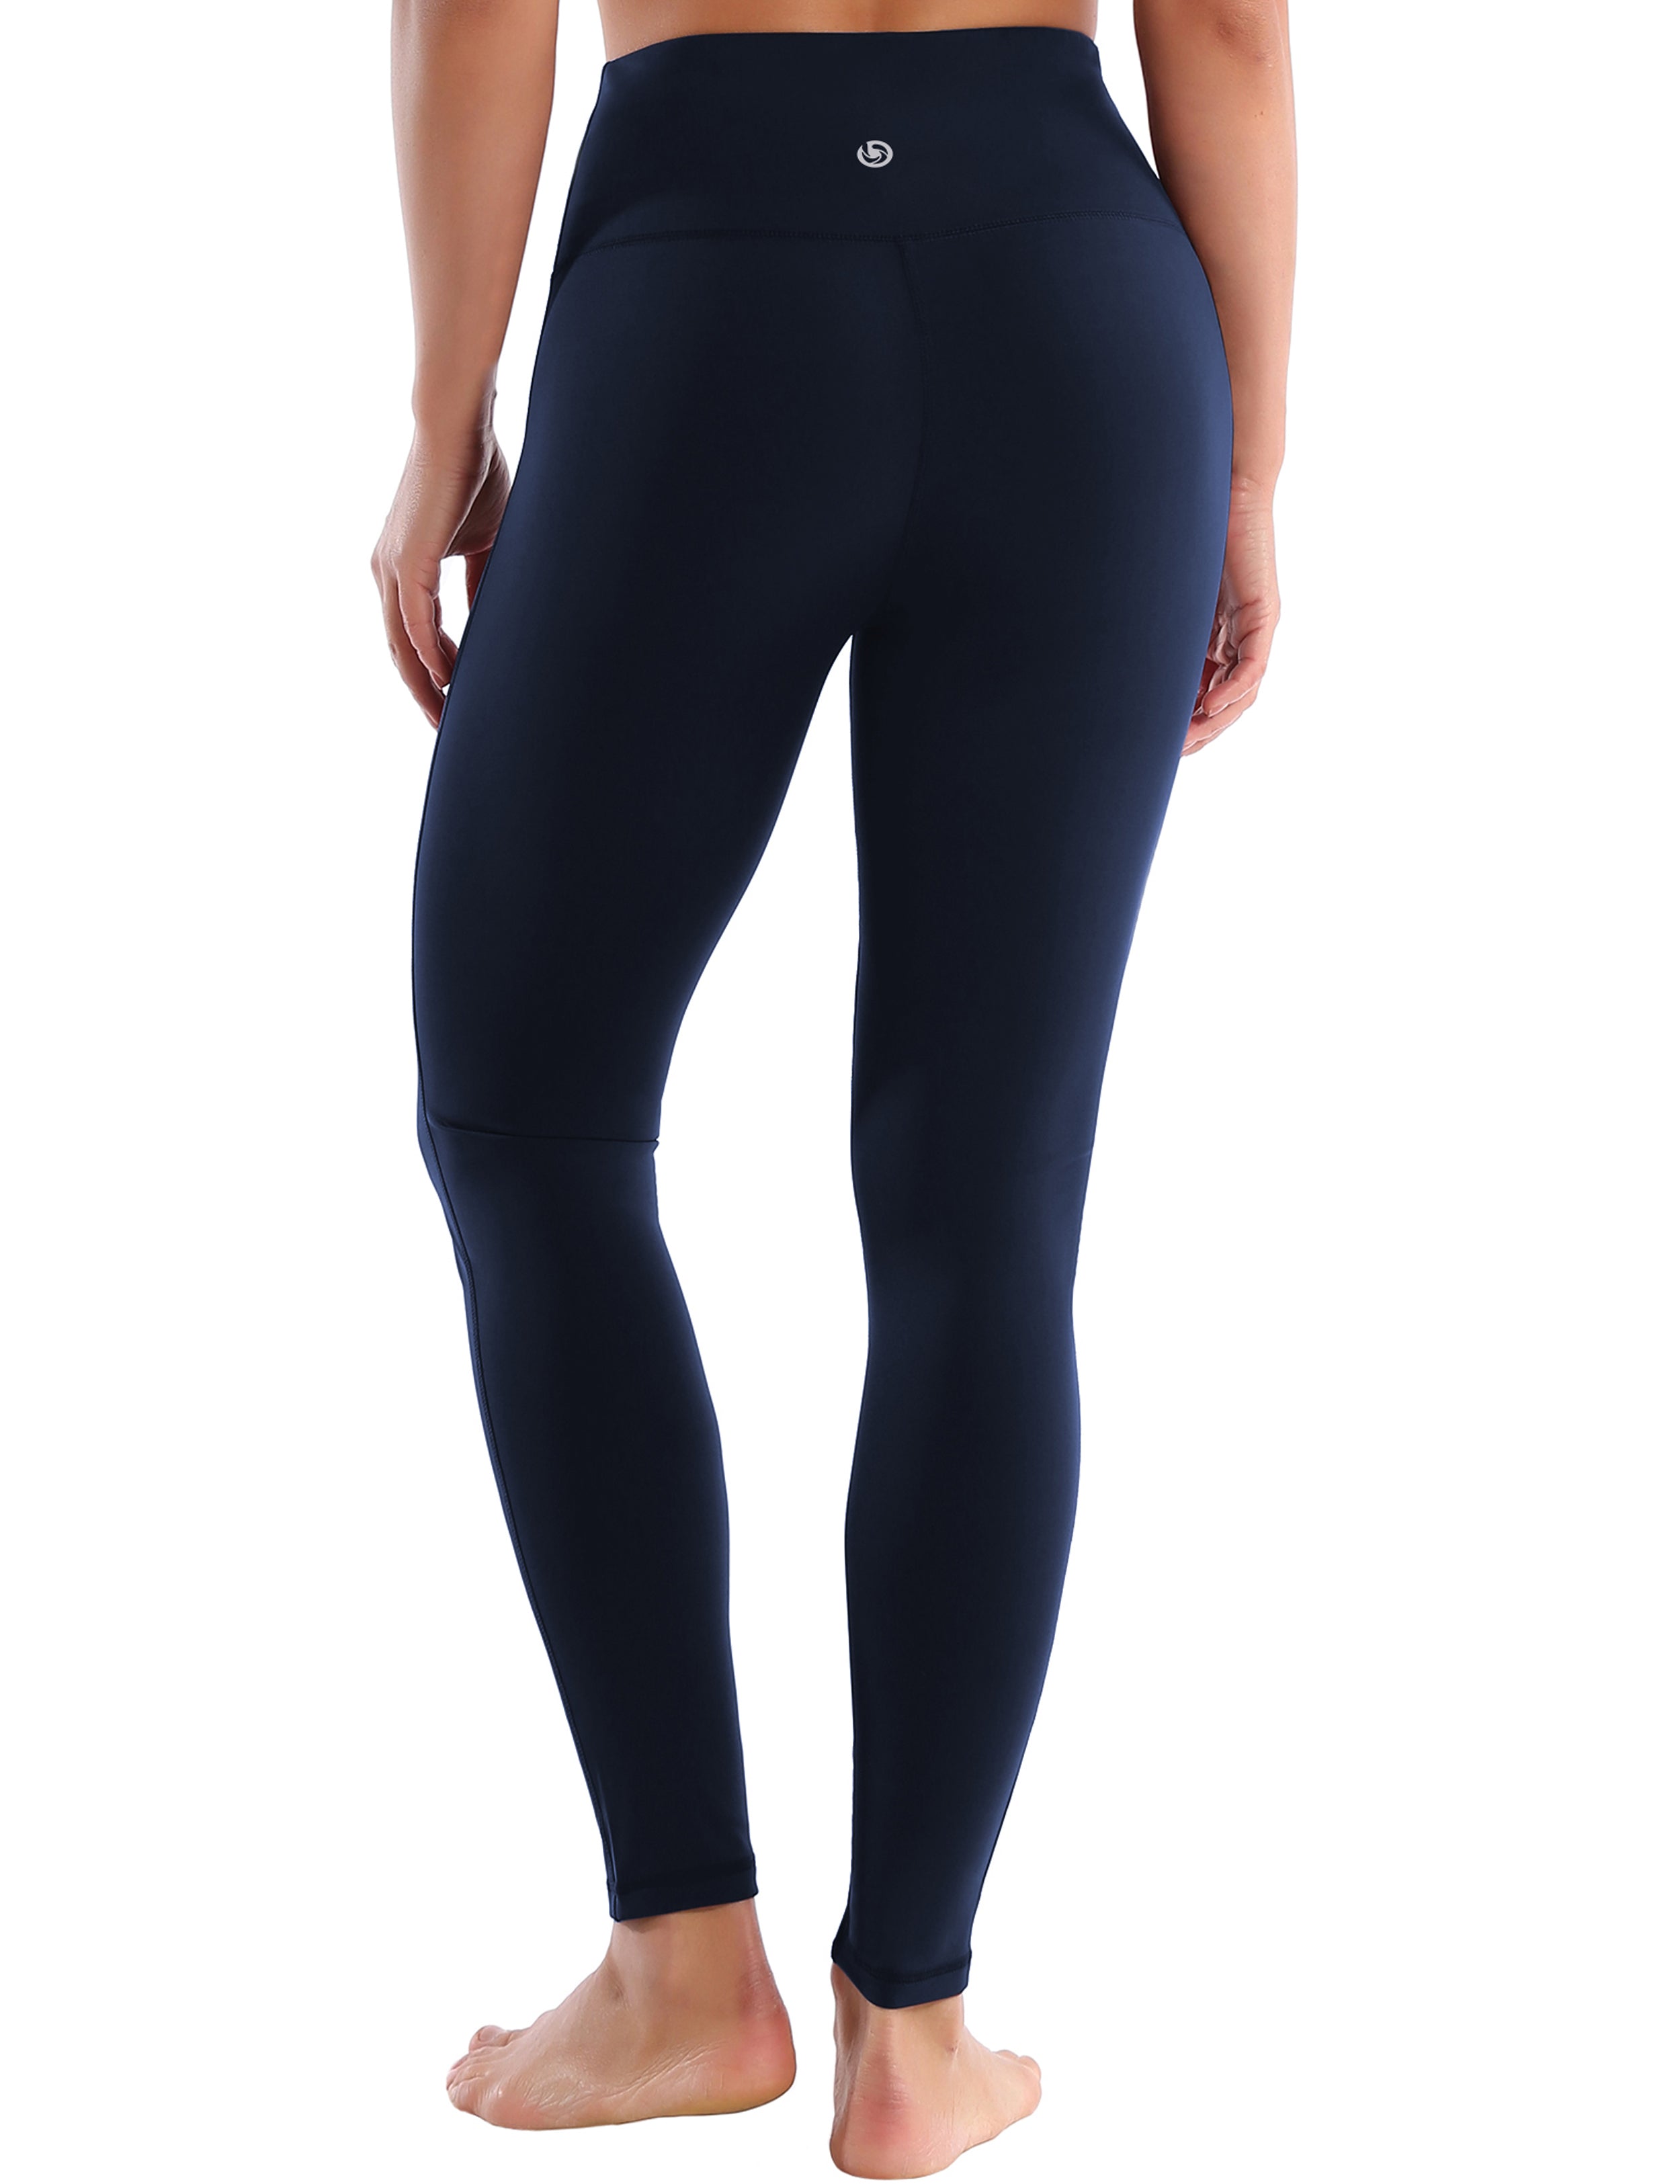 High Waist Side Line Gym Pants darknavy Side Line is Make Your Legs Look Longer and Thinner 75%Nylon/25%Spandex Fabric doesn't attract lint easily 4-way stretch No see-through Moisture-wicking Tummy control Inner pocket Two lengths